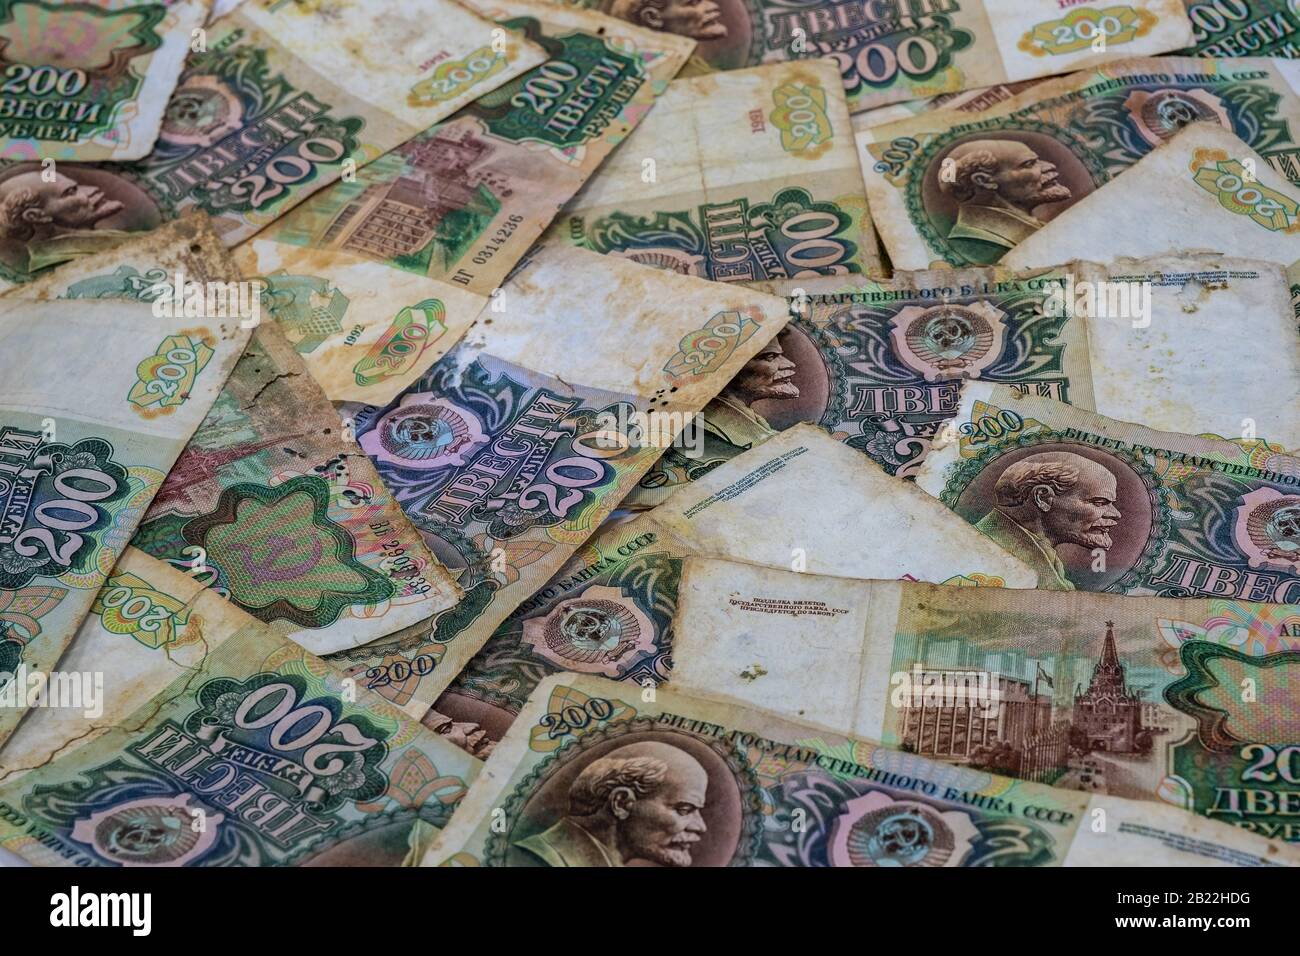 Background of two hundred ruble old banknotes of Soviet money of the sample of 1961, shot close-up. Stock Photo